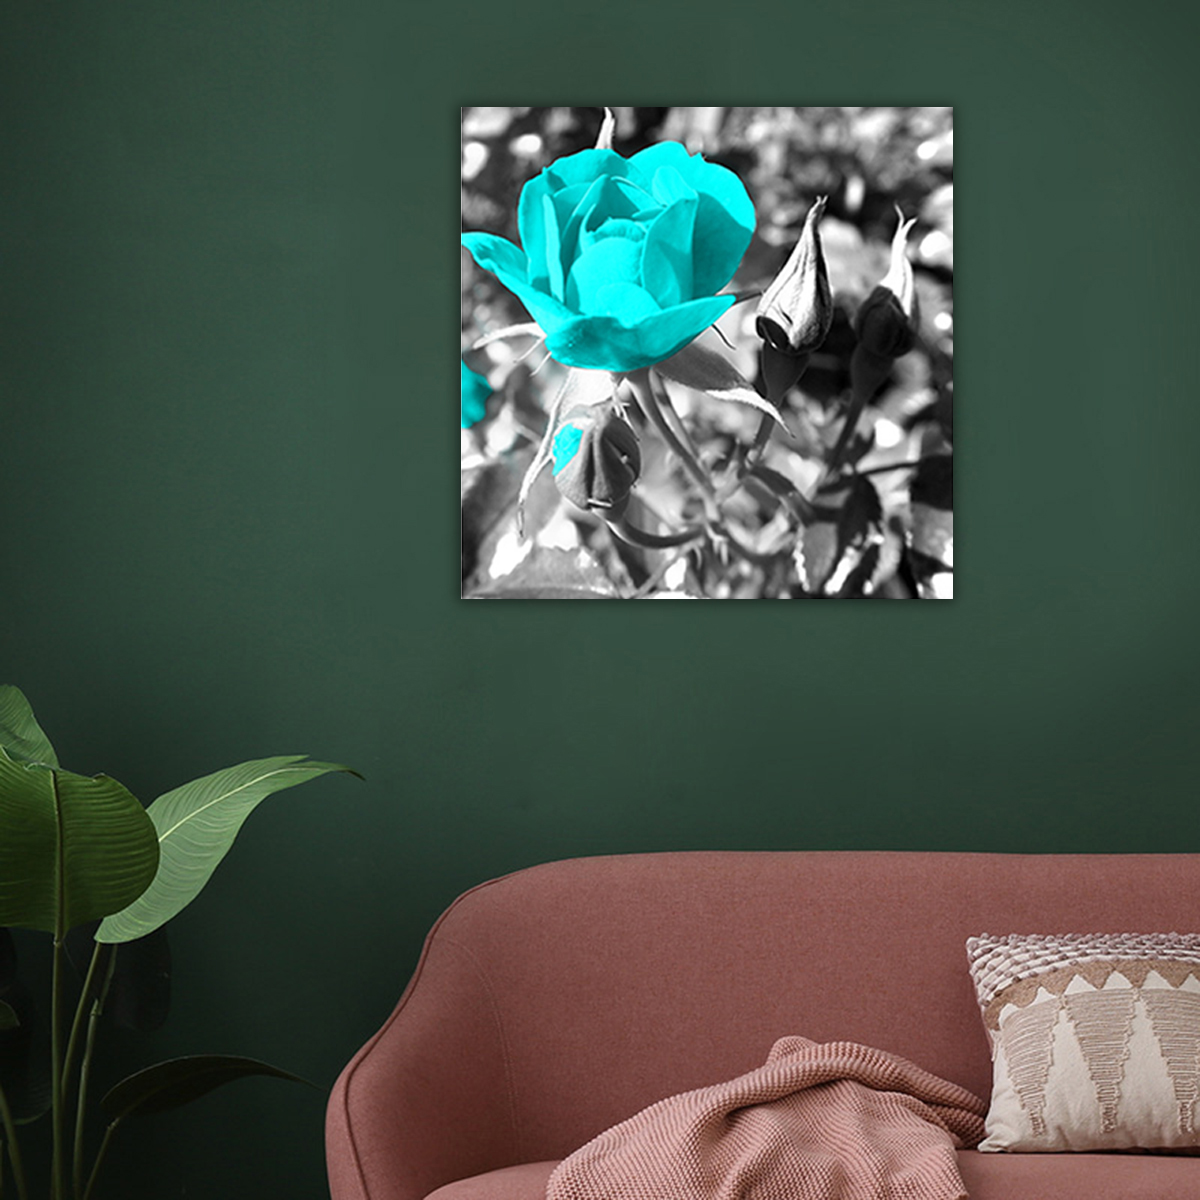 Blue-Rose-Canvas-Painting-Wall-Decorative-Print-Art-Pictures-Unframed-Wall-Hanging-Home-Office-Wall--1778176-10